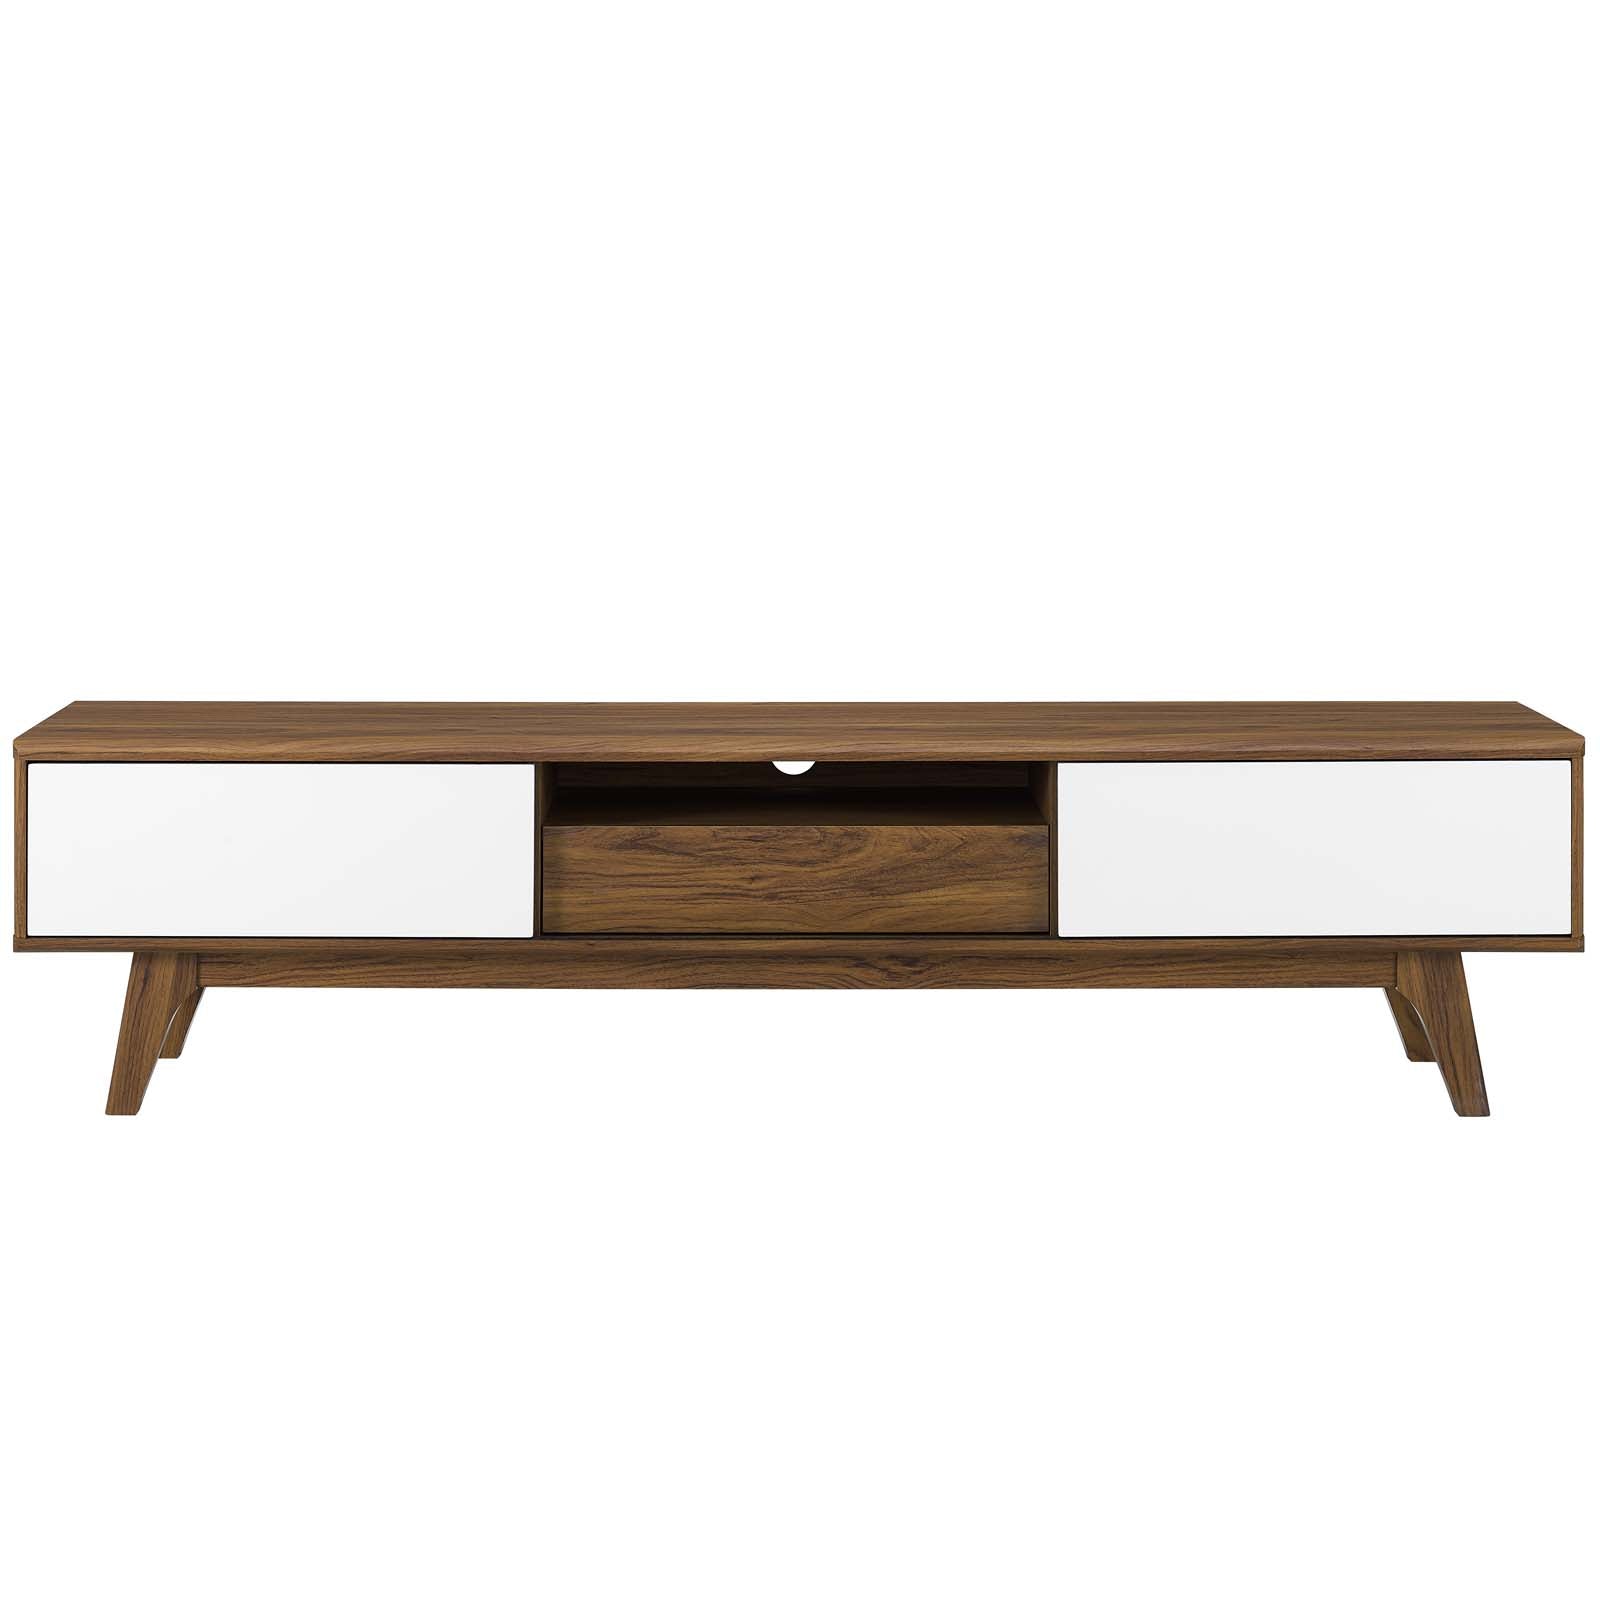 Envision 70" Media Console Wood TV Stand - East Shore Modern Home Furnishings